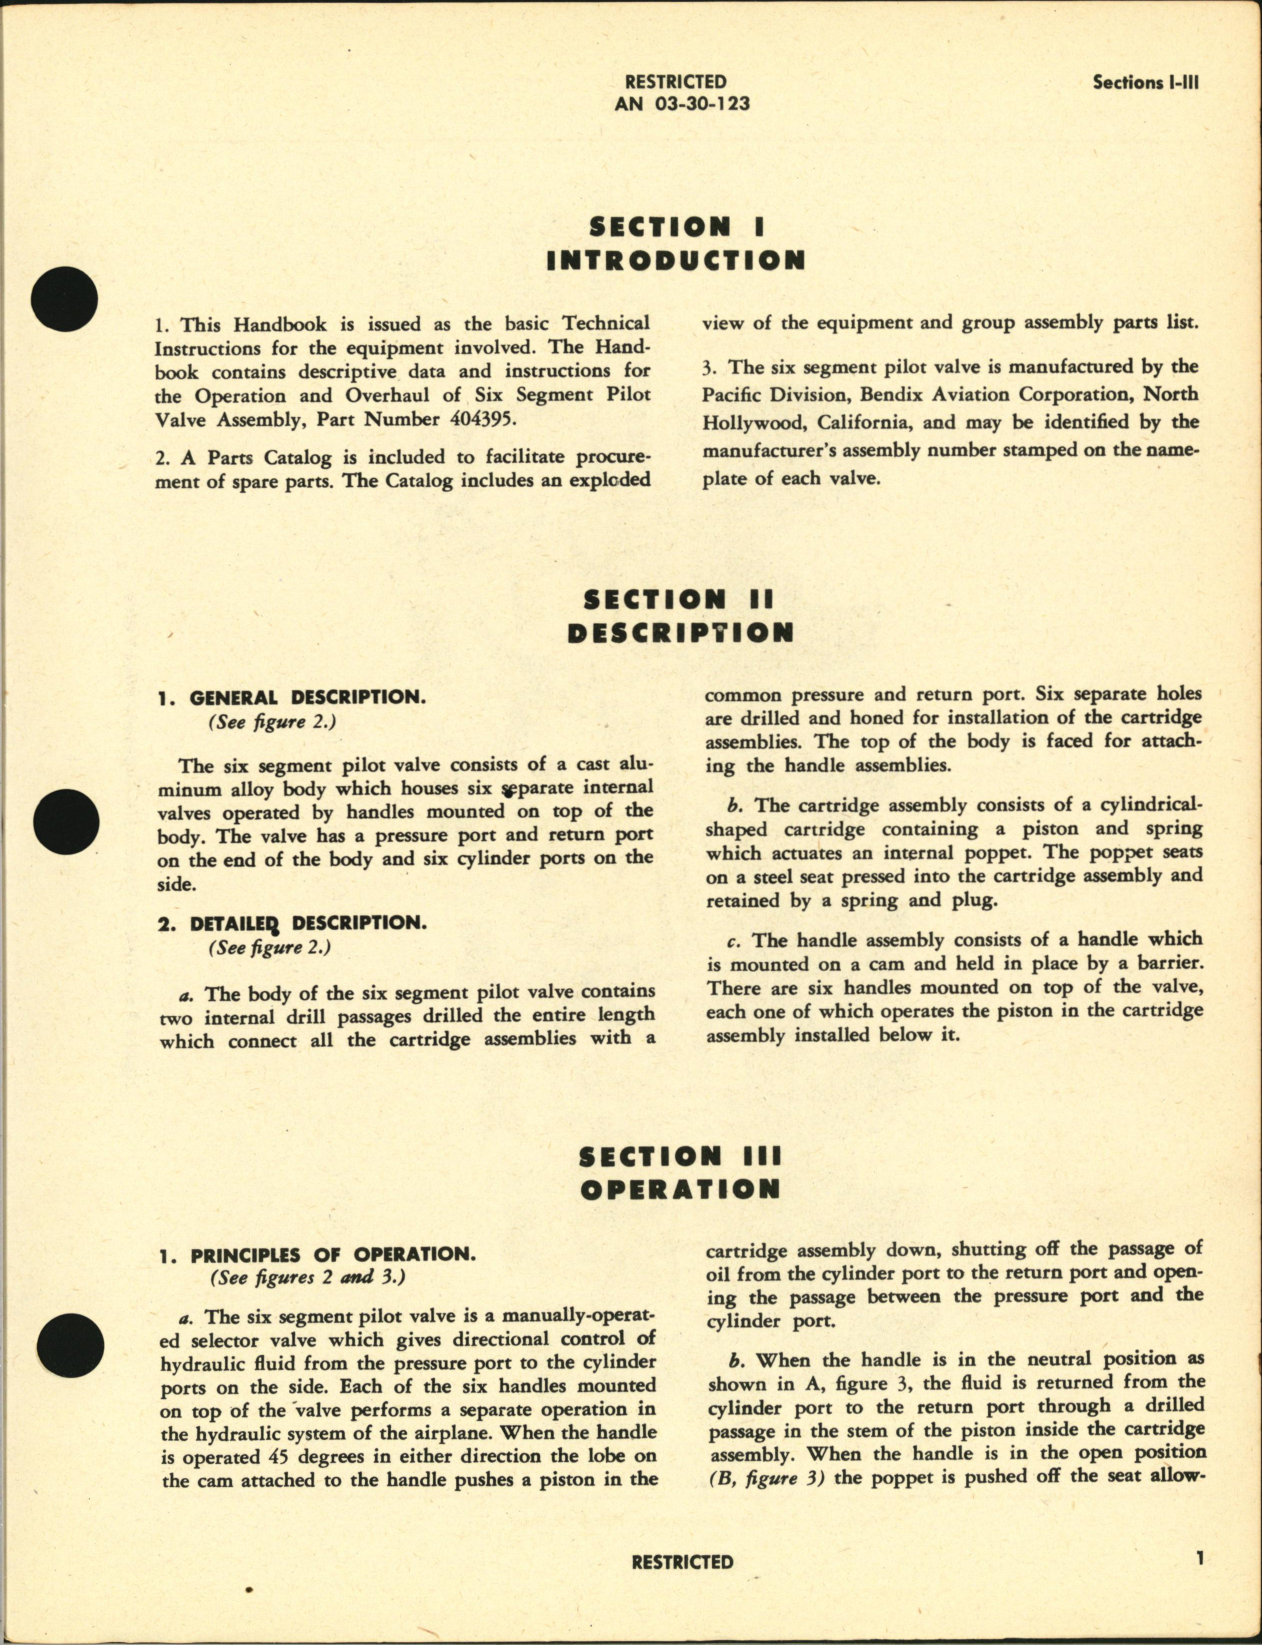 Sample page 5 from AirCorps Library document: Handbook of Overhaul Instructions with Parts Catalog for Six Segment Pilot Valve 404395